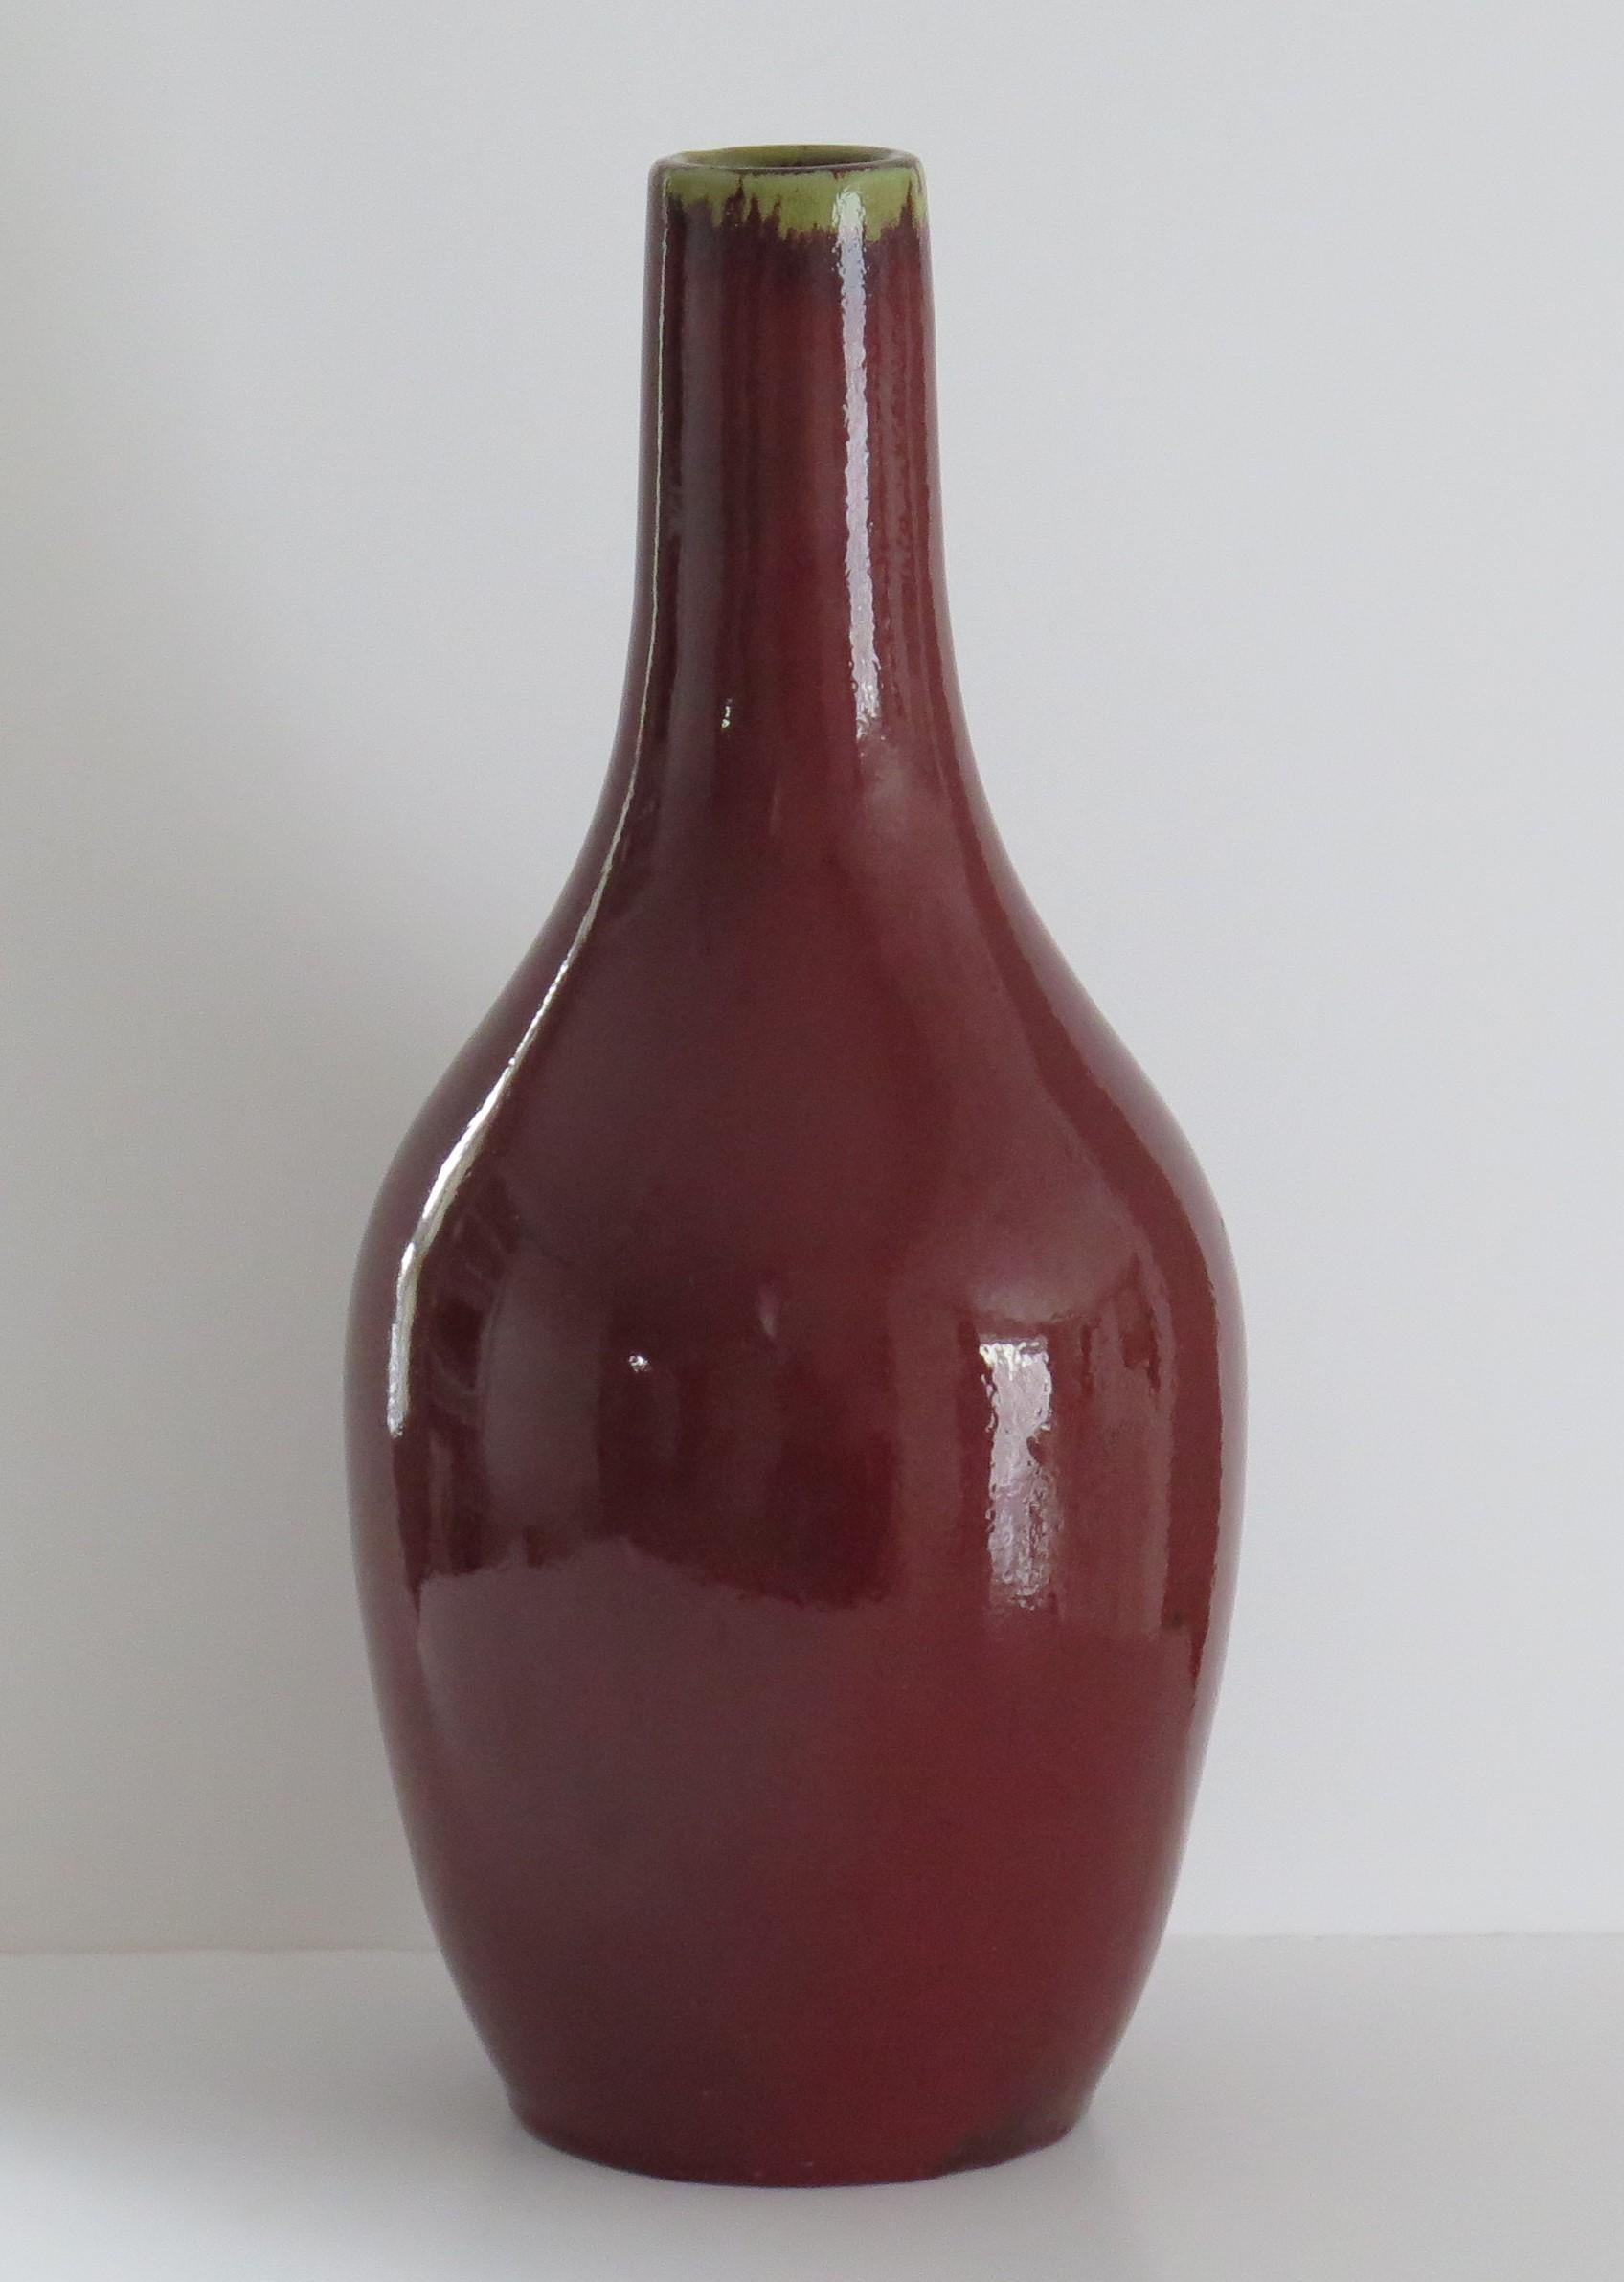 This is a very decorative porcelain Large Chinese Export Bottle Vase or jar with a monochrome ox blood red 